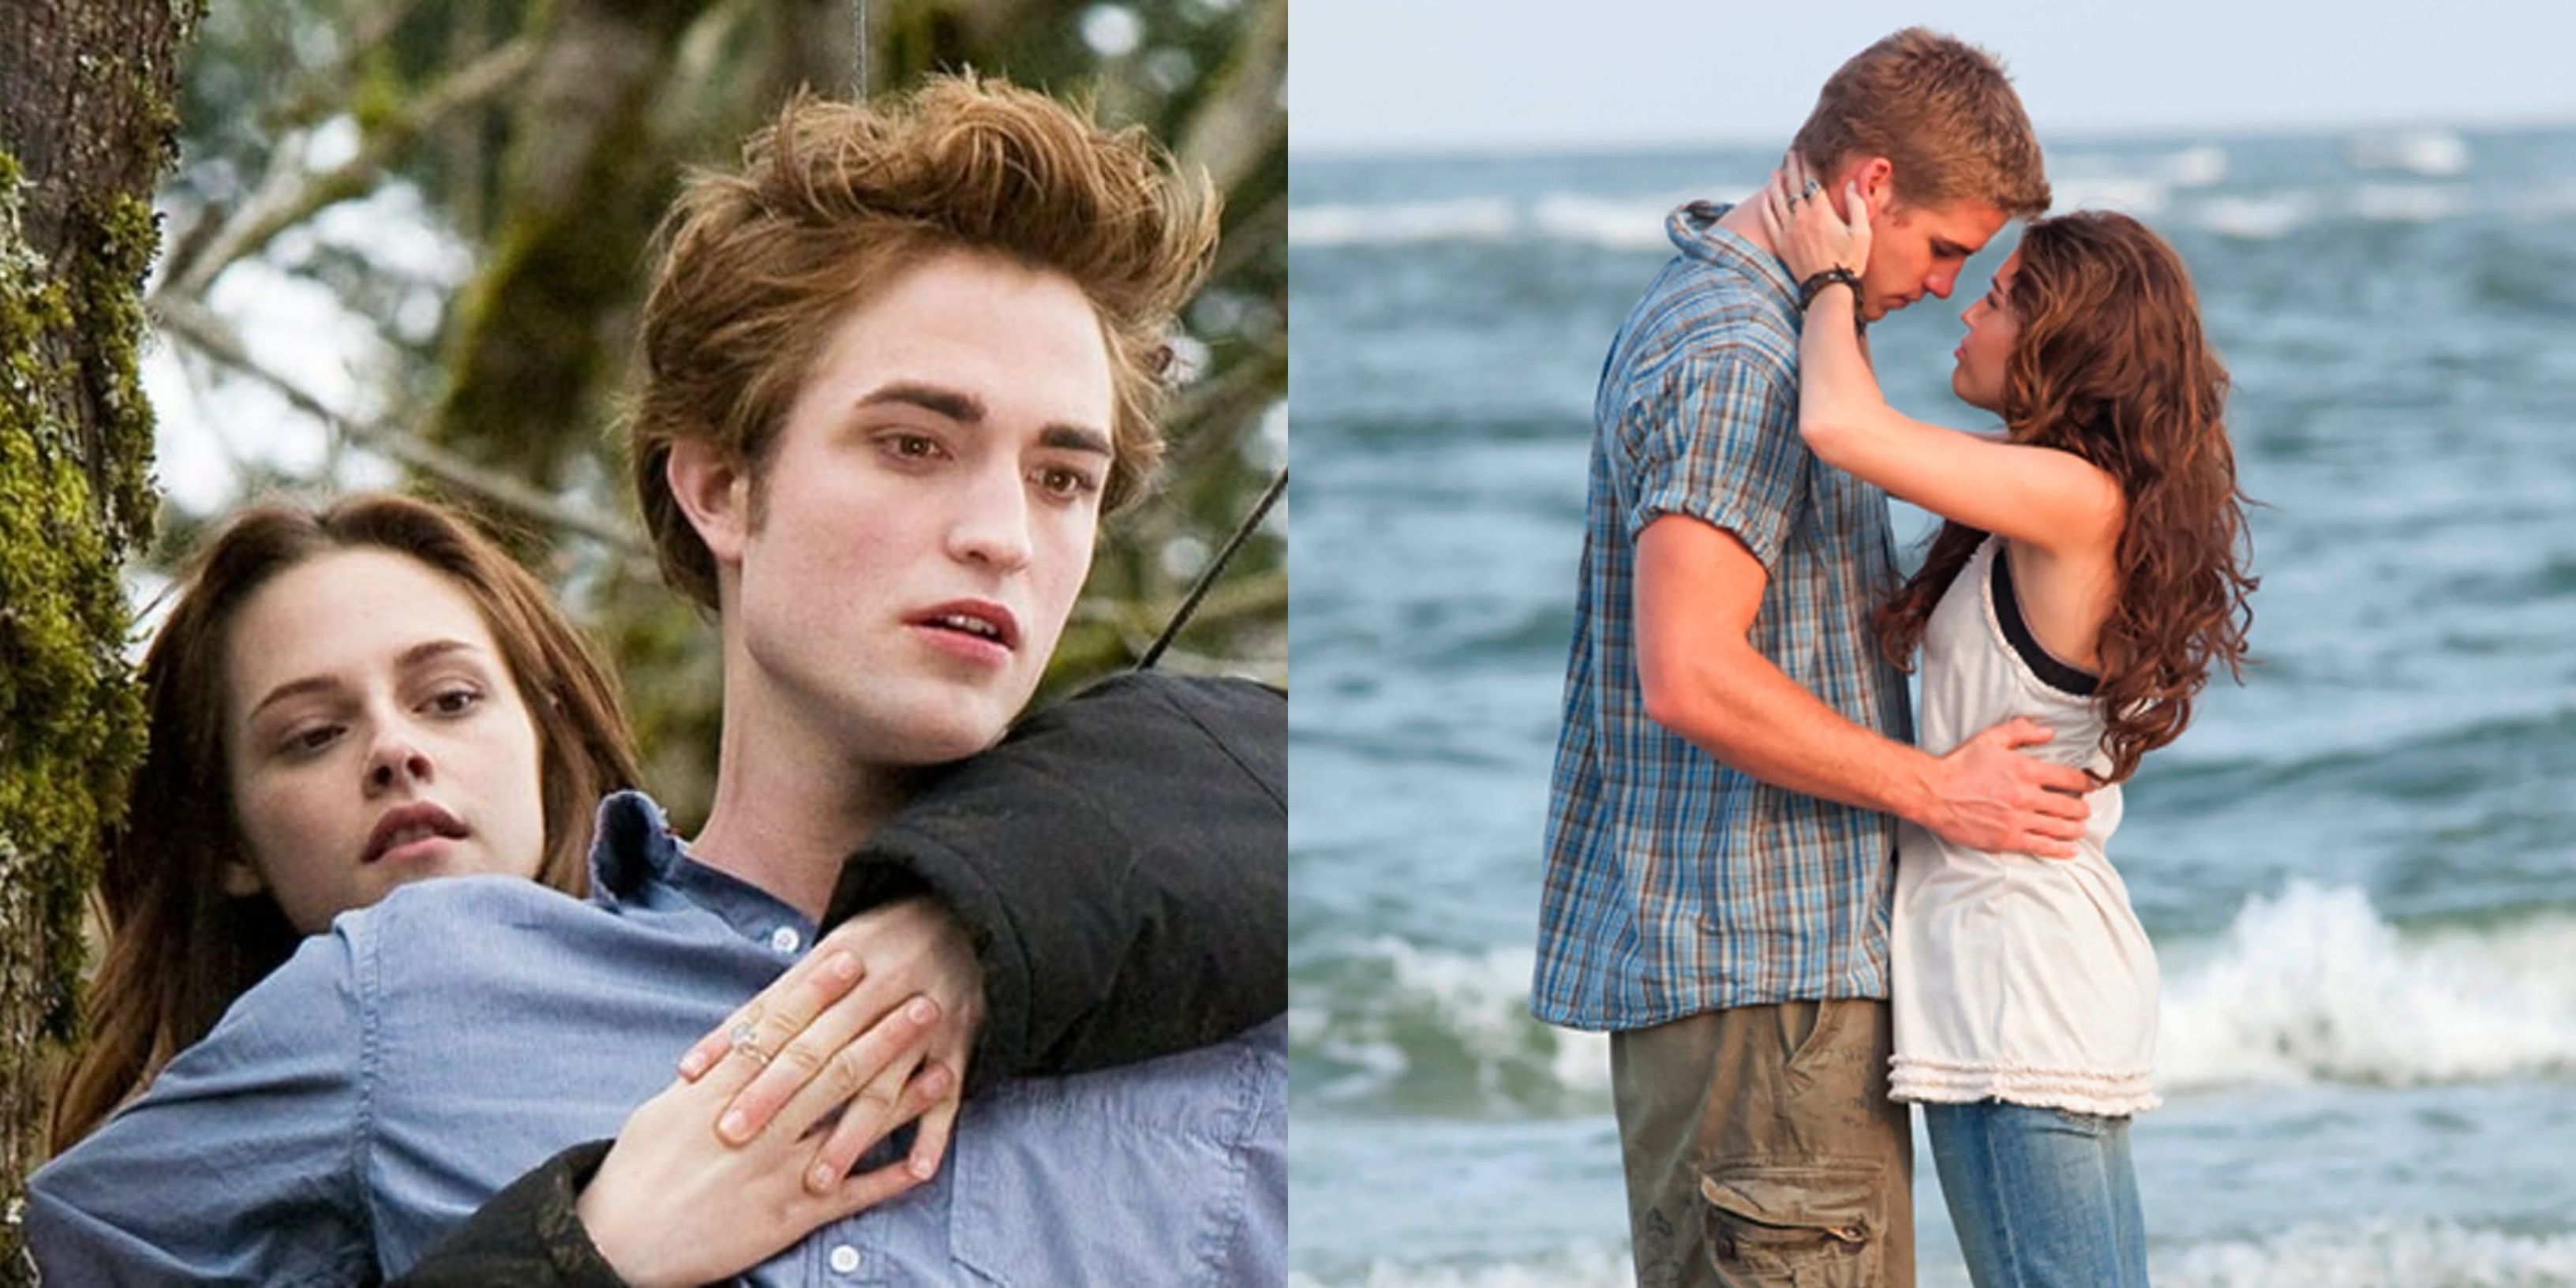 10 Celebrity Couples Who Fell In Love On Set (But It Didn't Last)